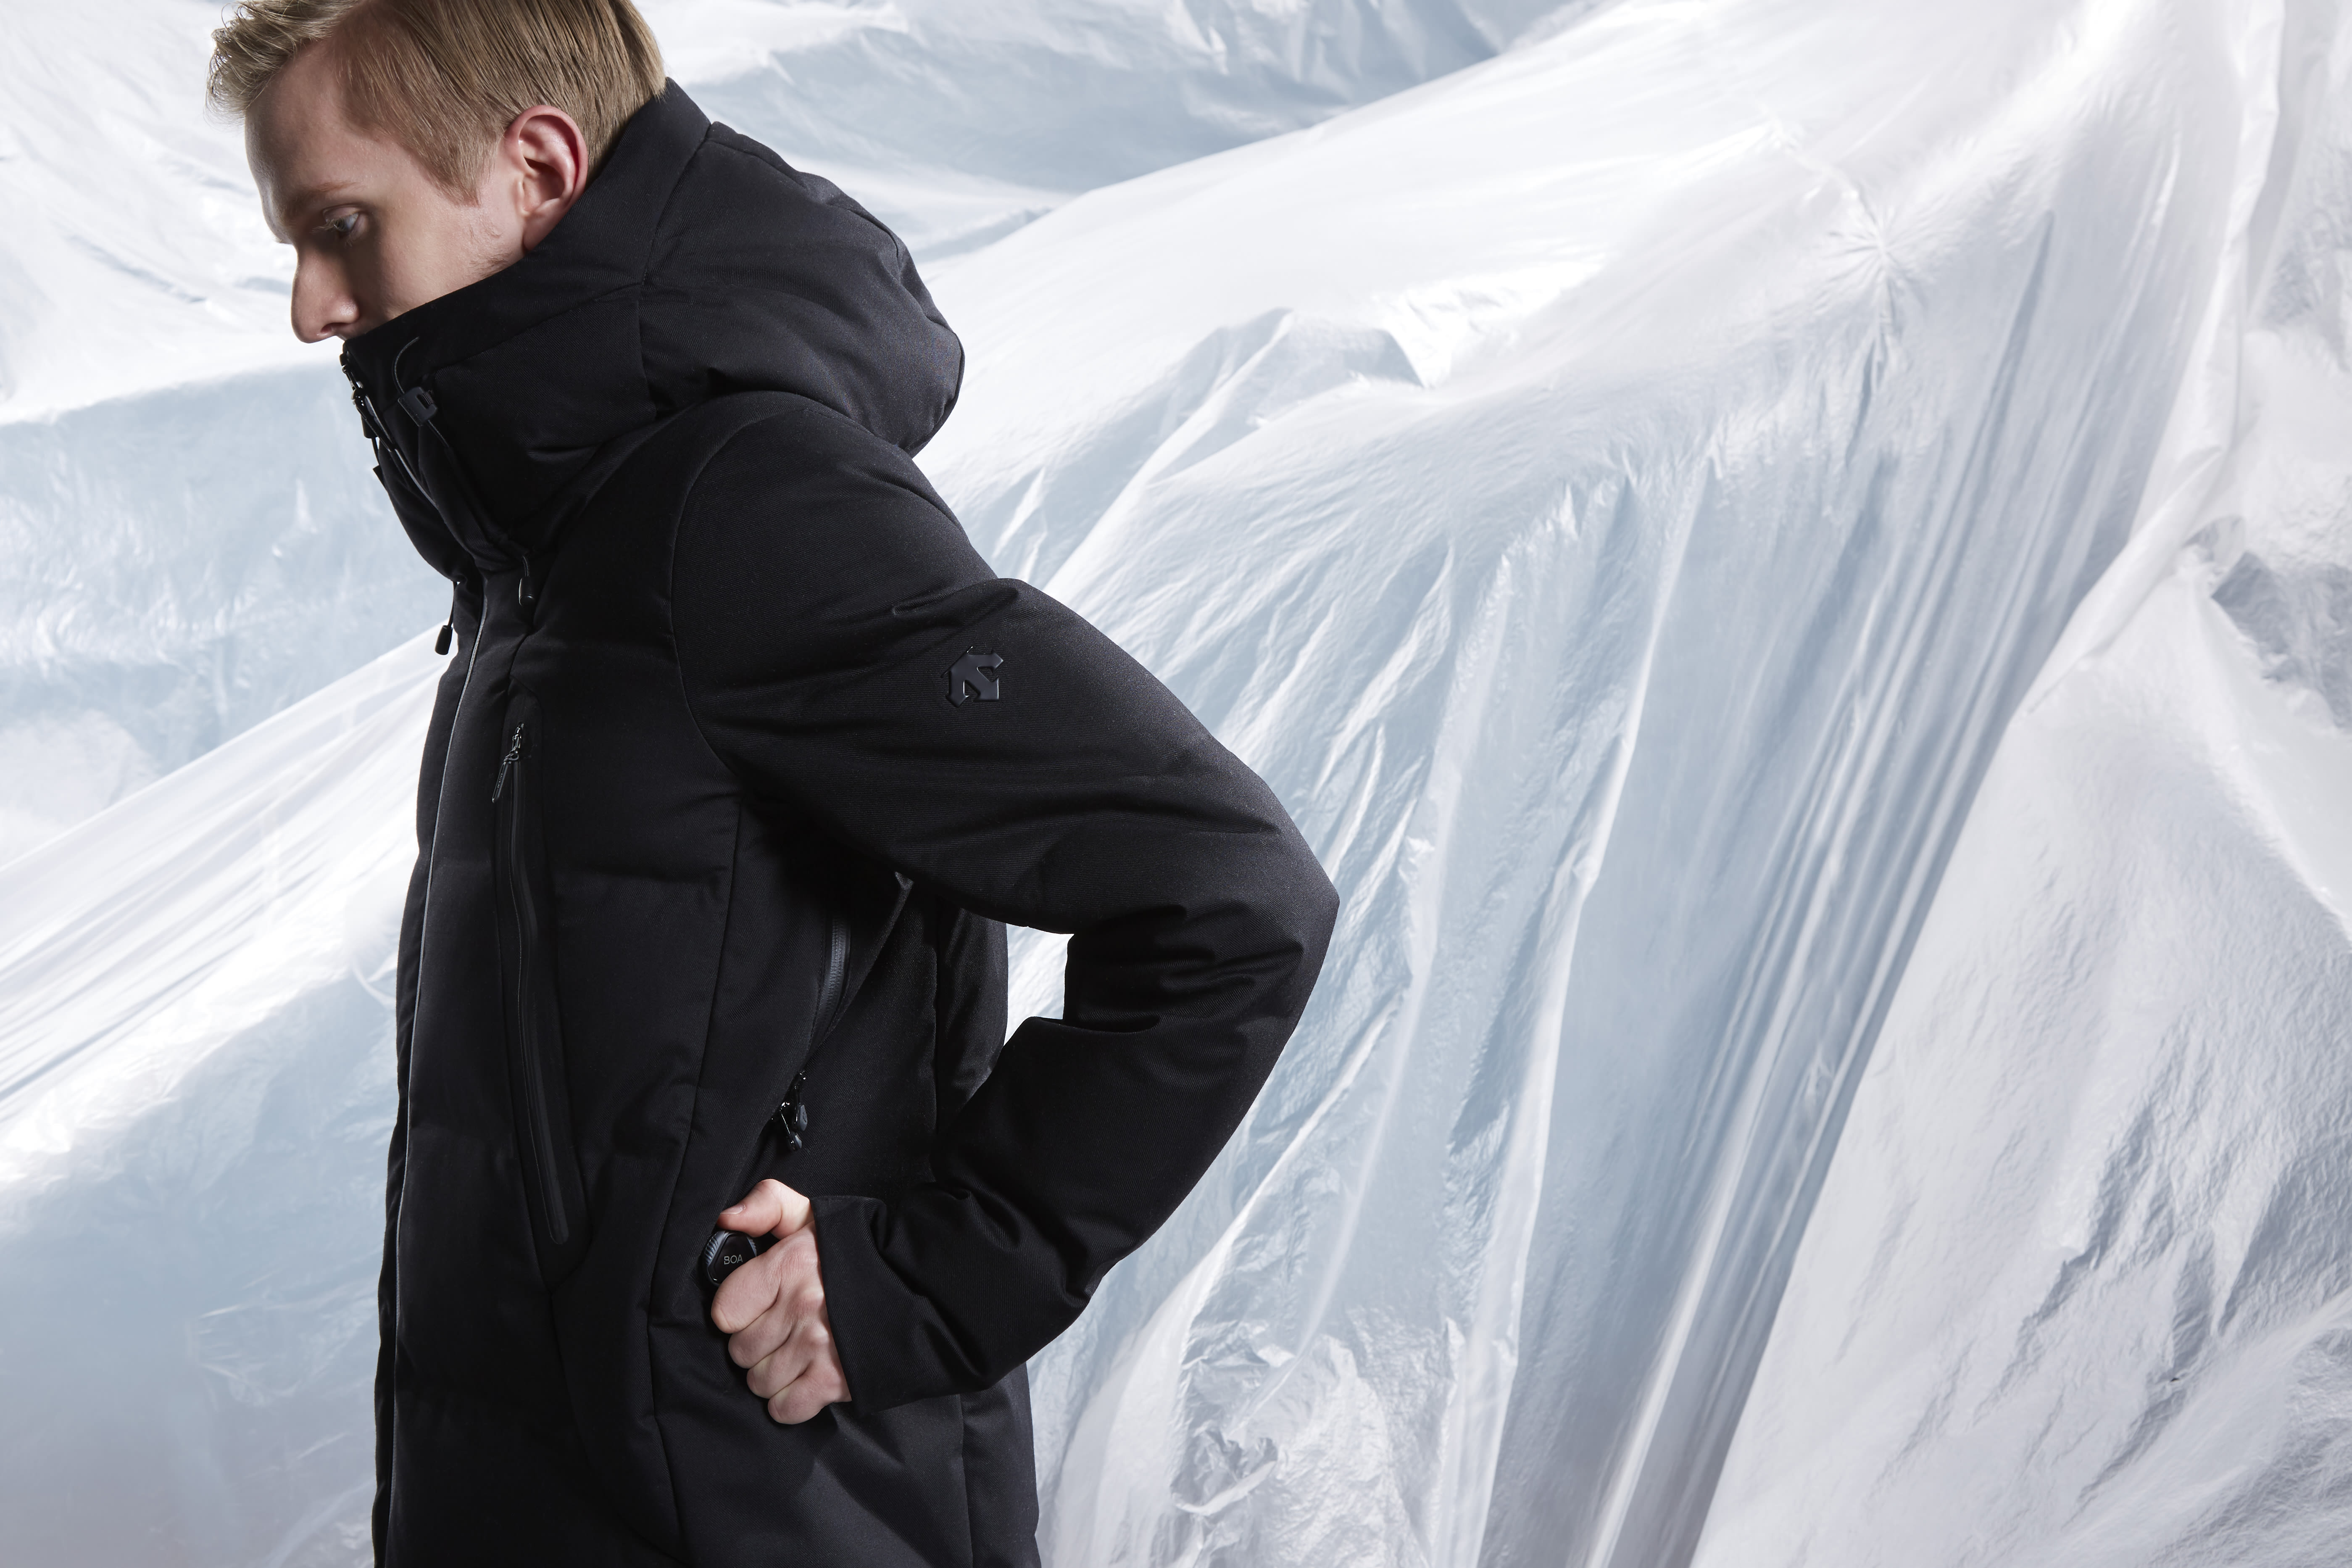 Brave the Elements with the Assistance of Descente Allterrain